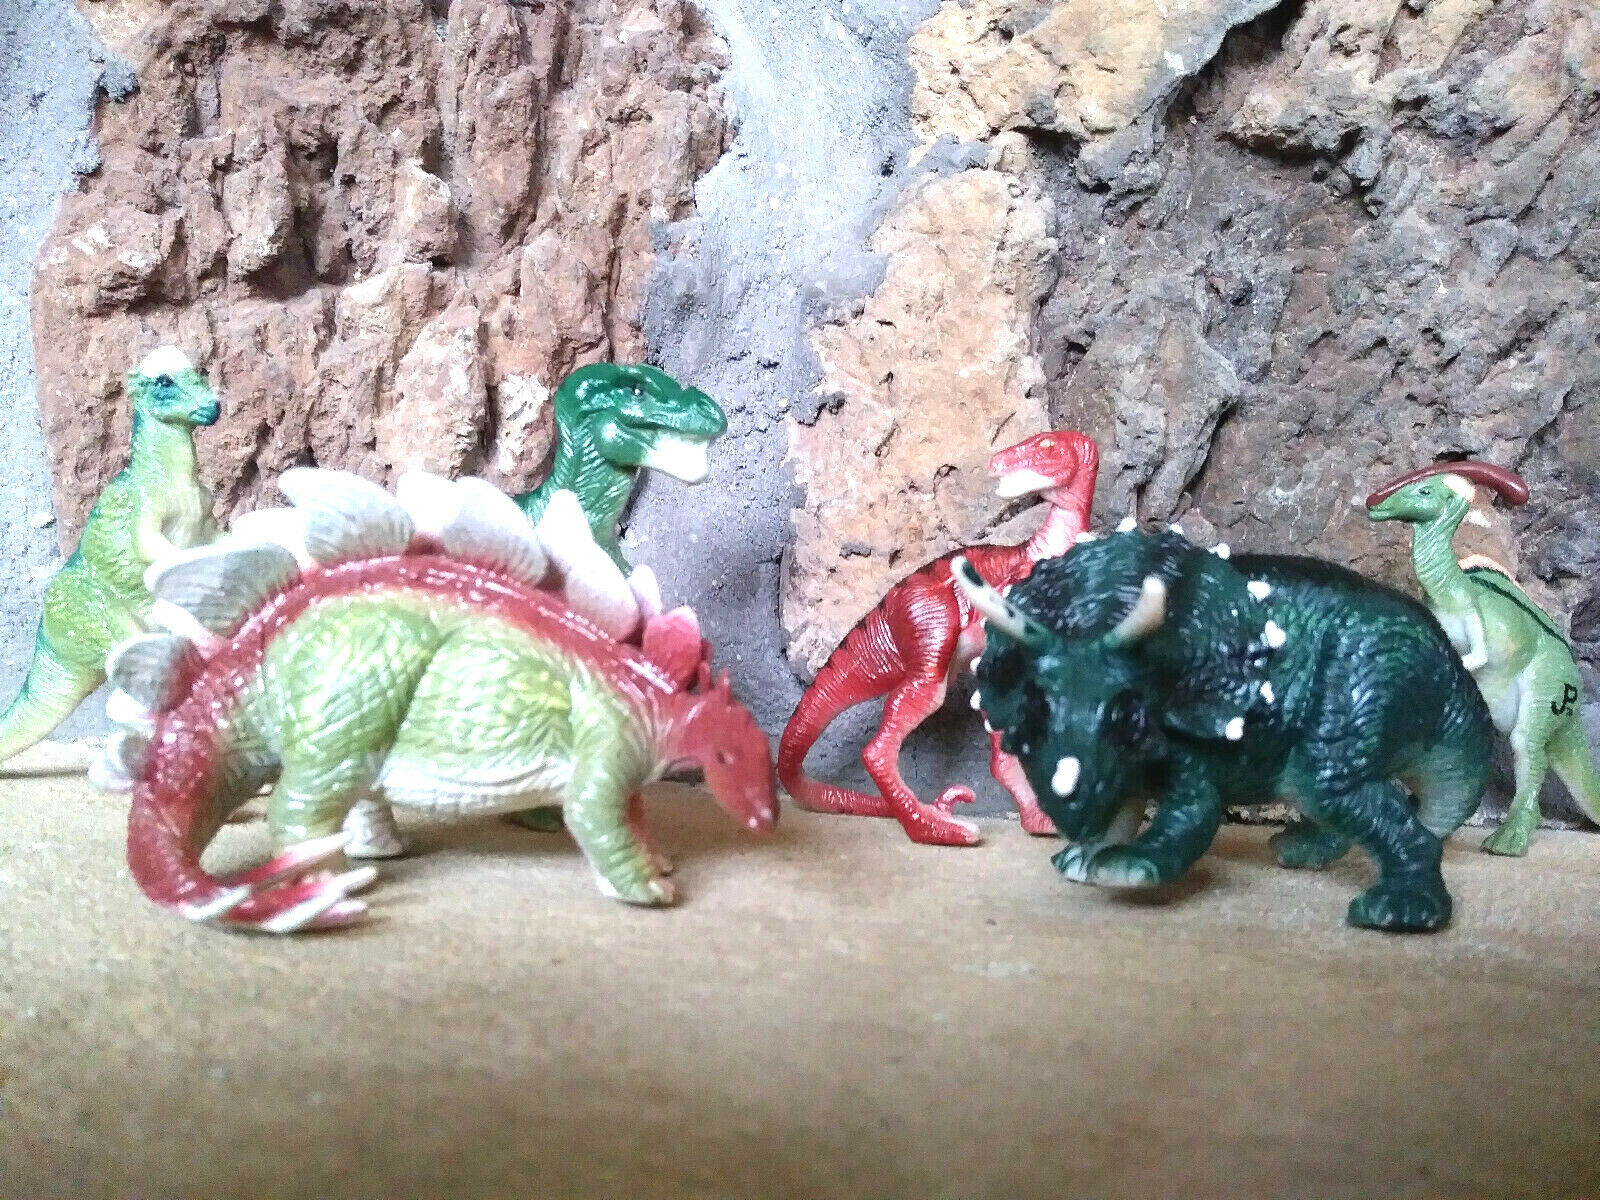 VINTAGE EQUITY TOYS JURASSIC PARK LOST WORLD FIGURINE SET, MADE IN CHINA 1997